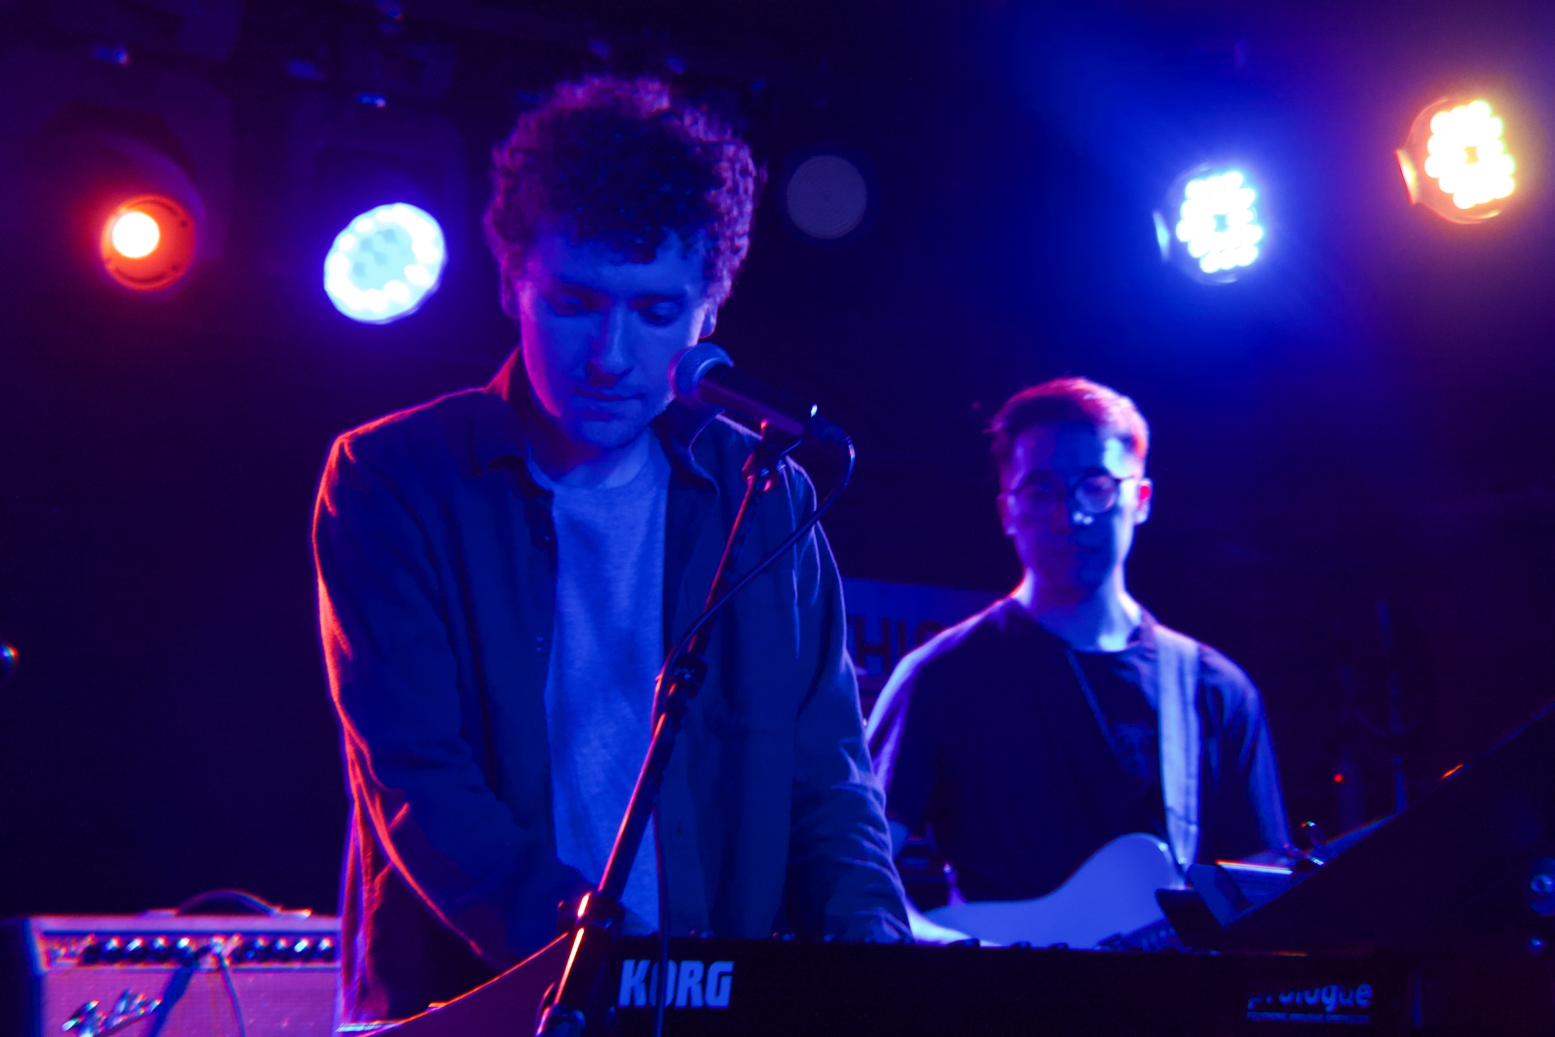 Diandra Reviews It All- The Noble Kids Take Over Mercury Lounge